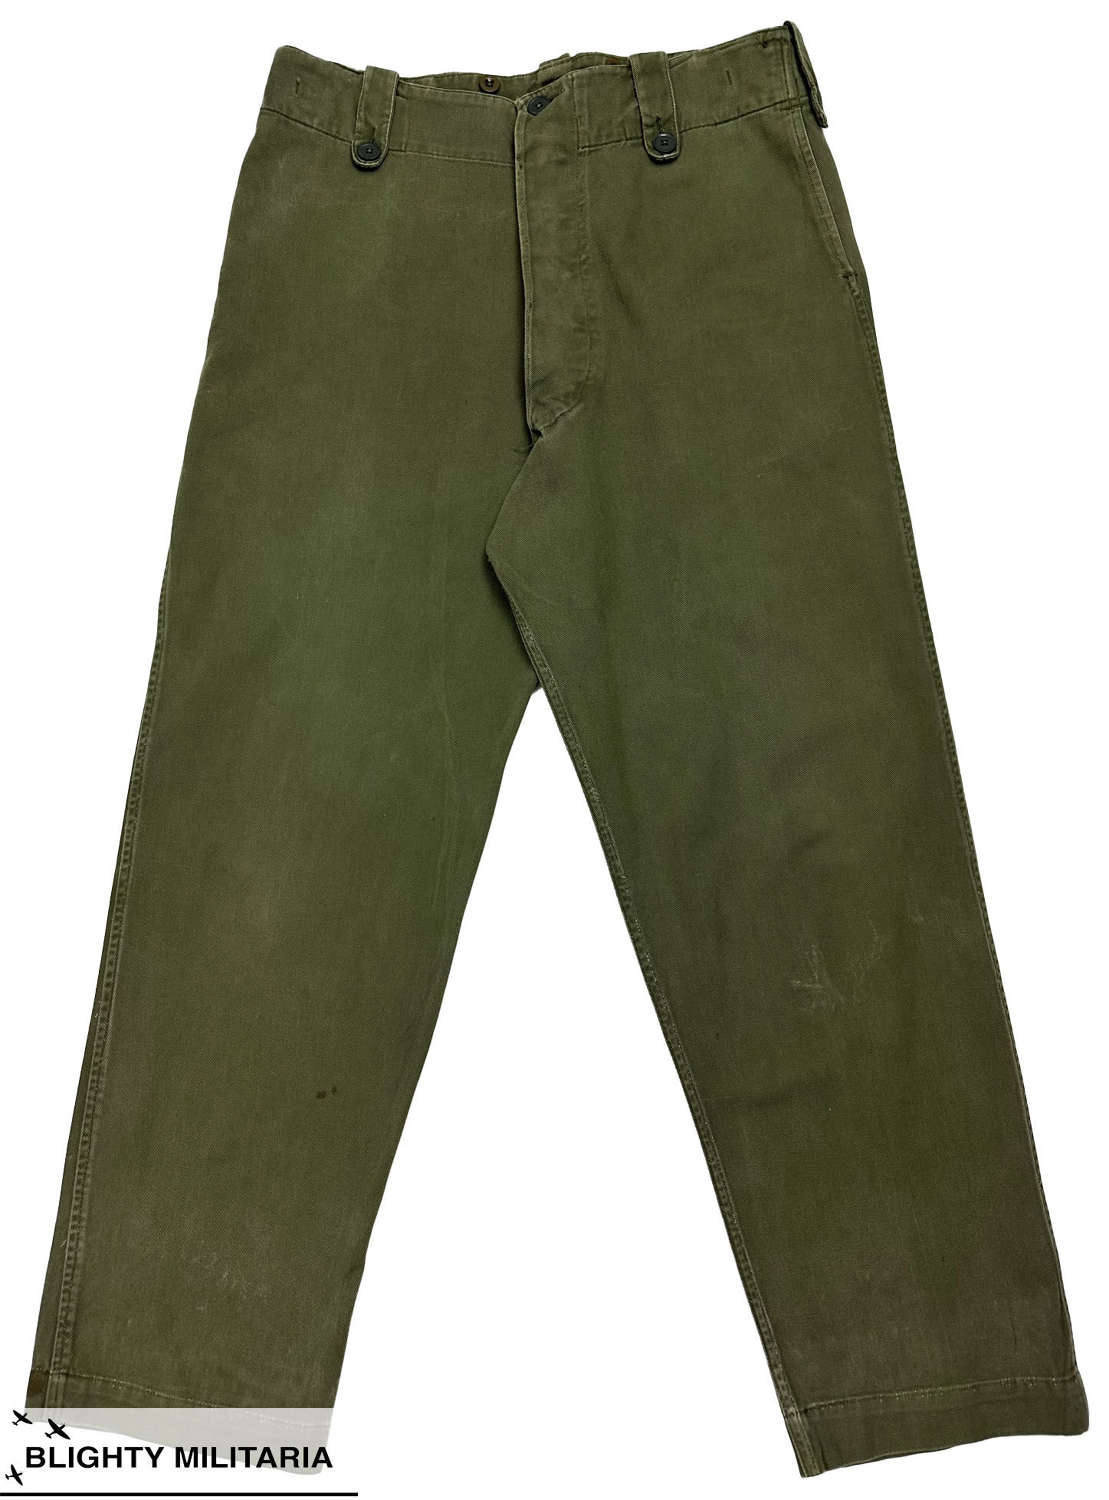 Original 1964 Dated Overall Green Trousers - Size 6 35x30